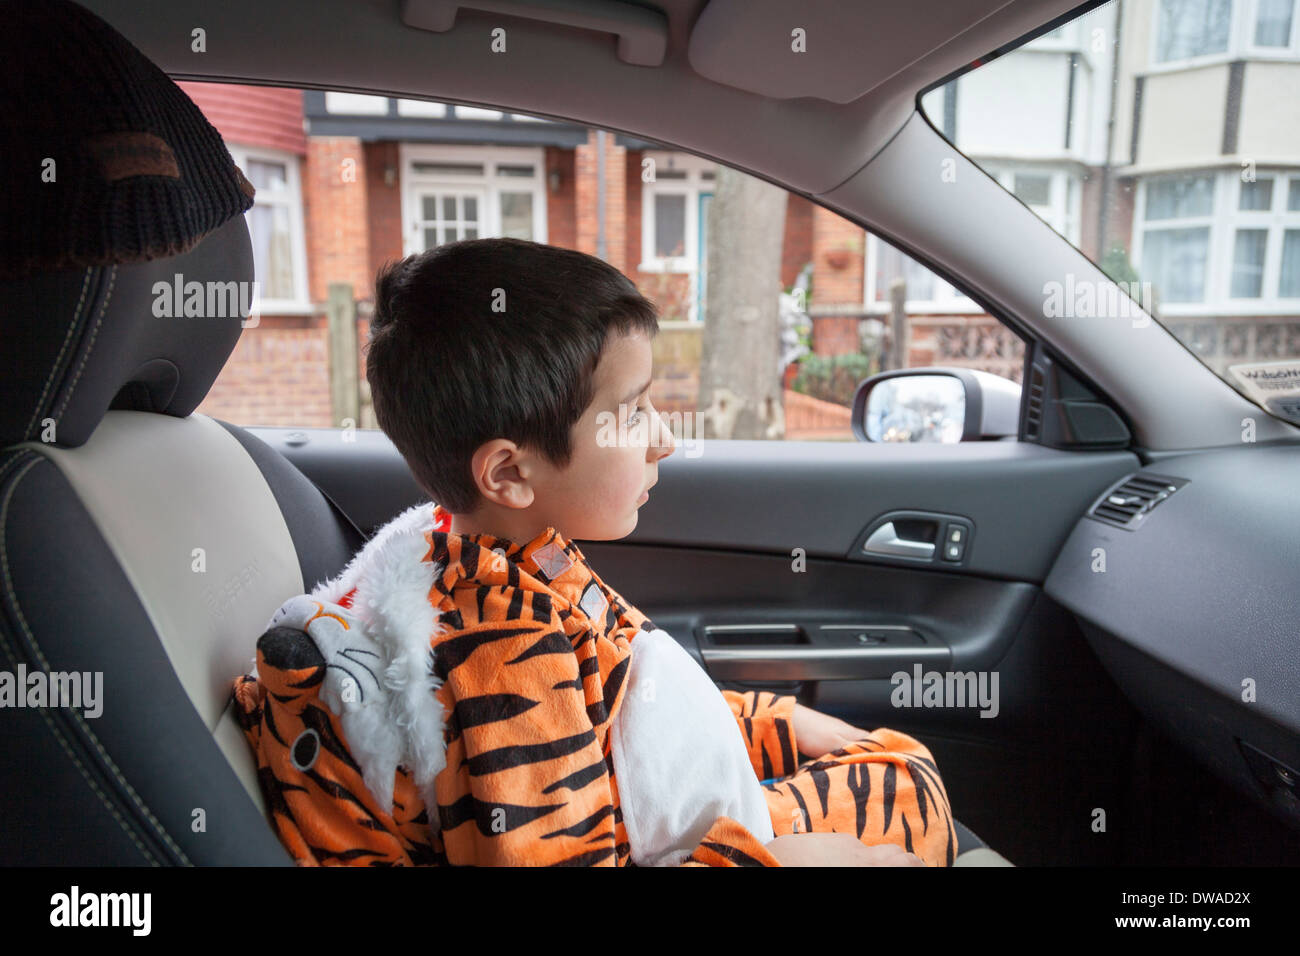 Child sitting in a car ,dressed in tiger costume Stock Photo